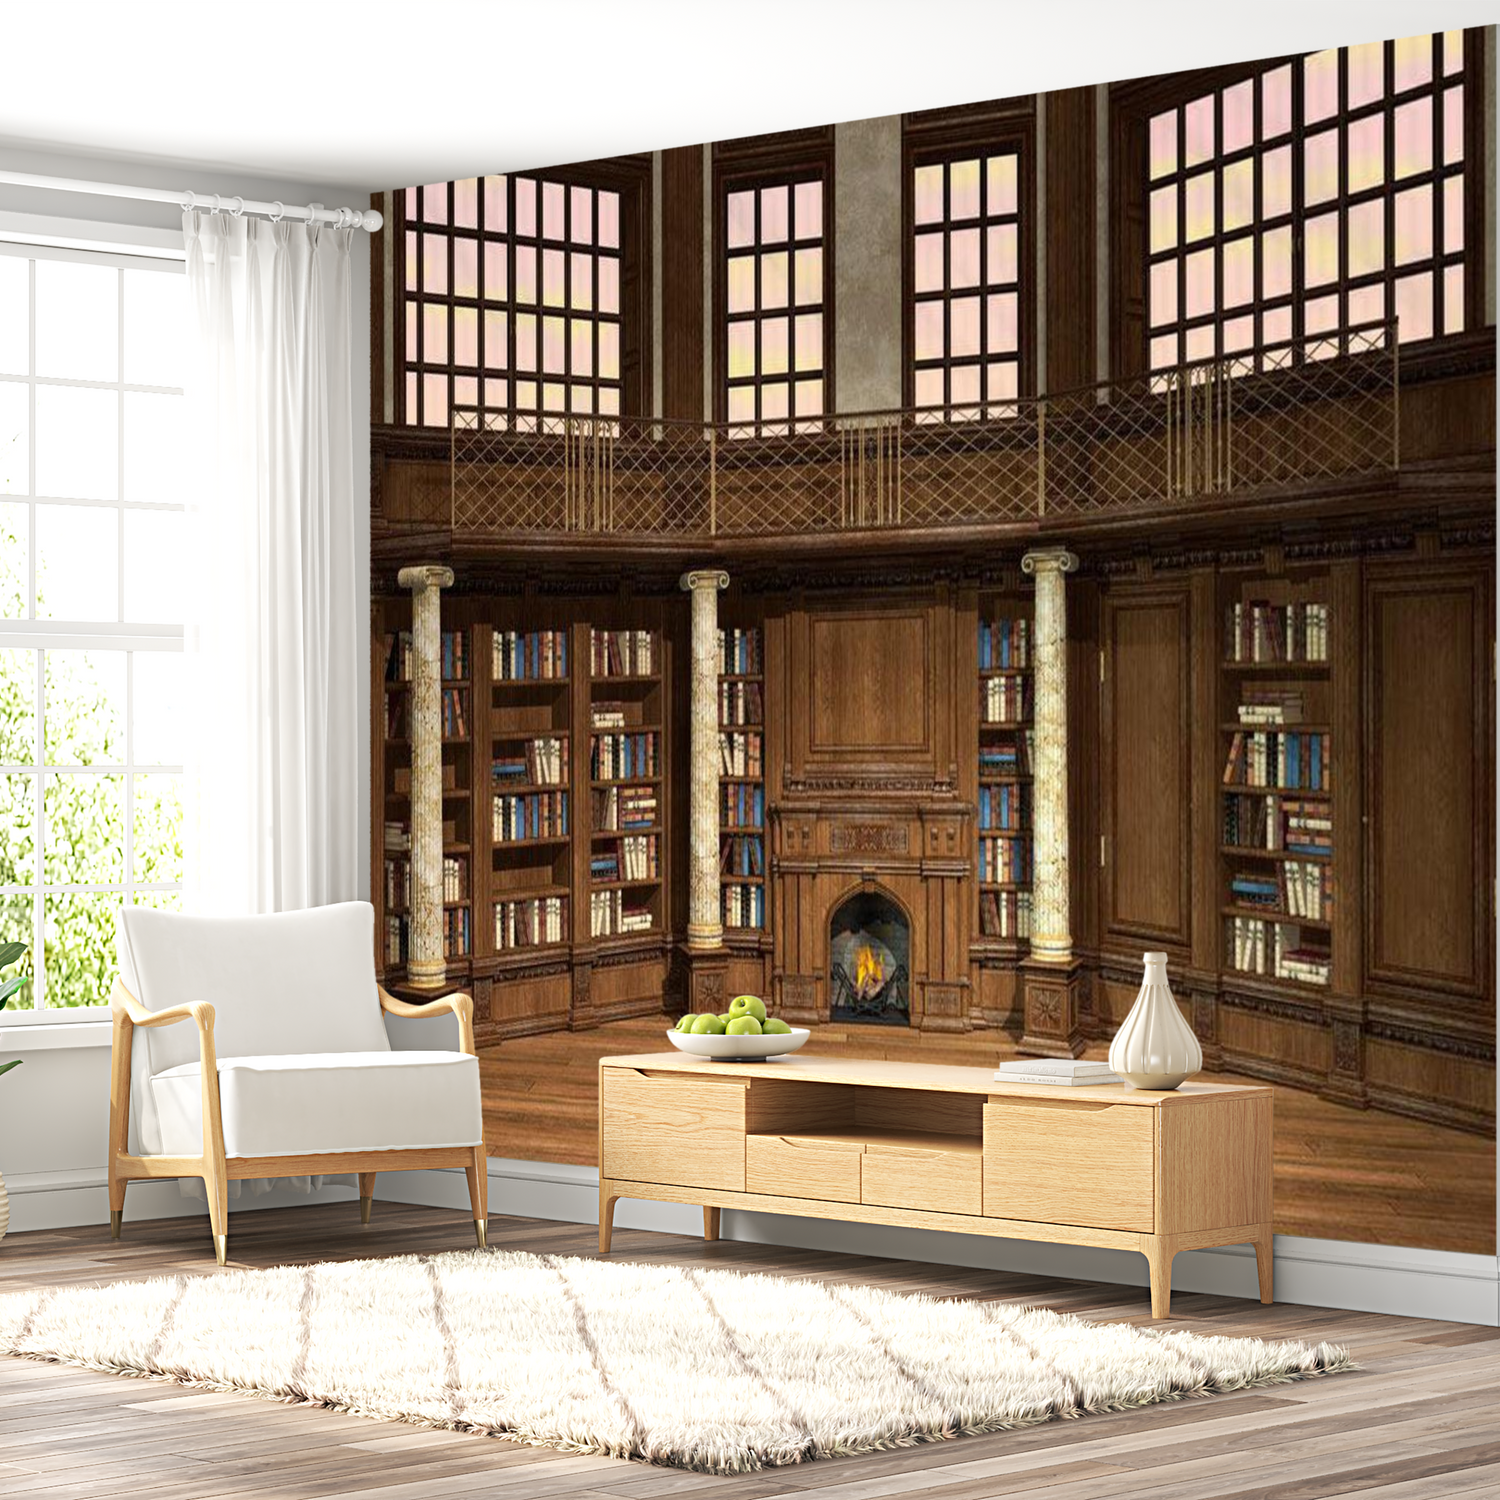 3D Illusion Wallpaper Wall Mural - Library Of Dreams 39"Wx27"H